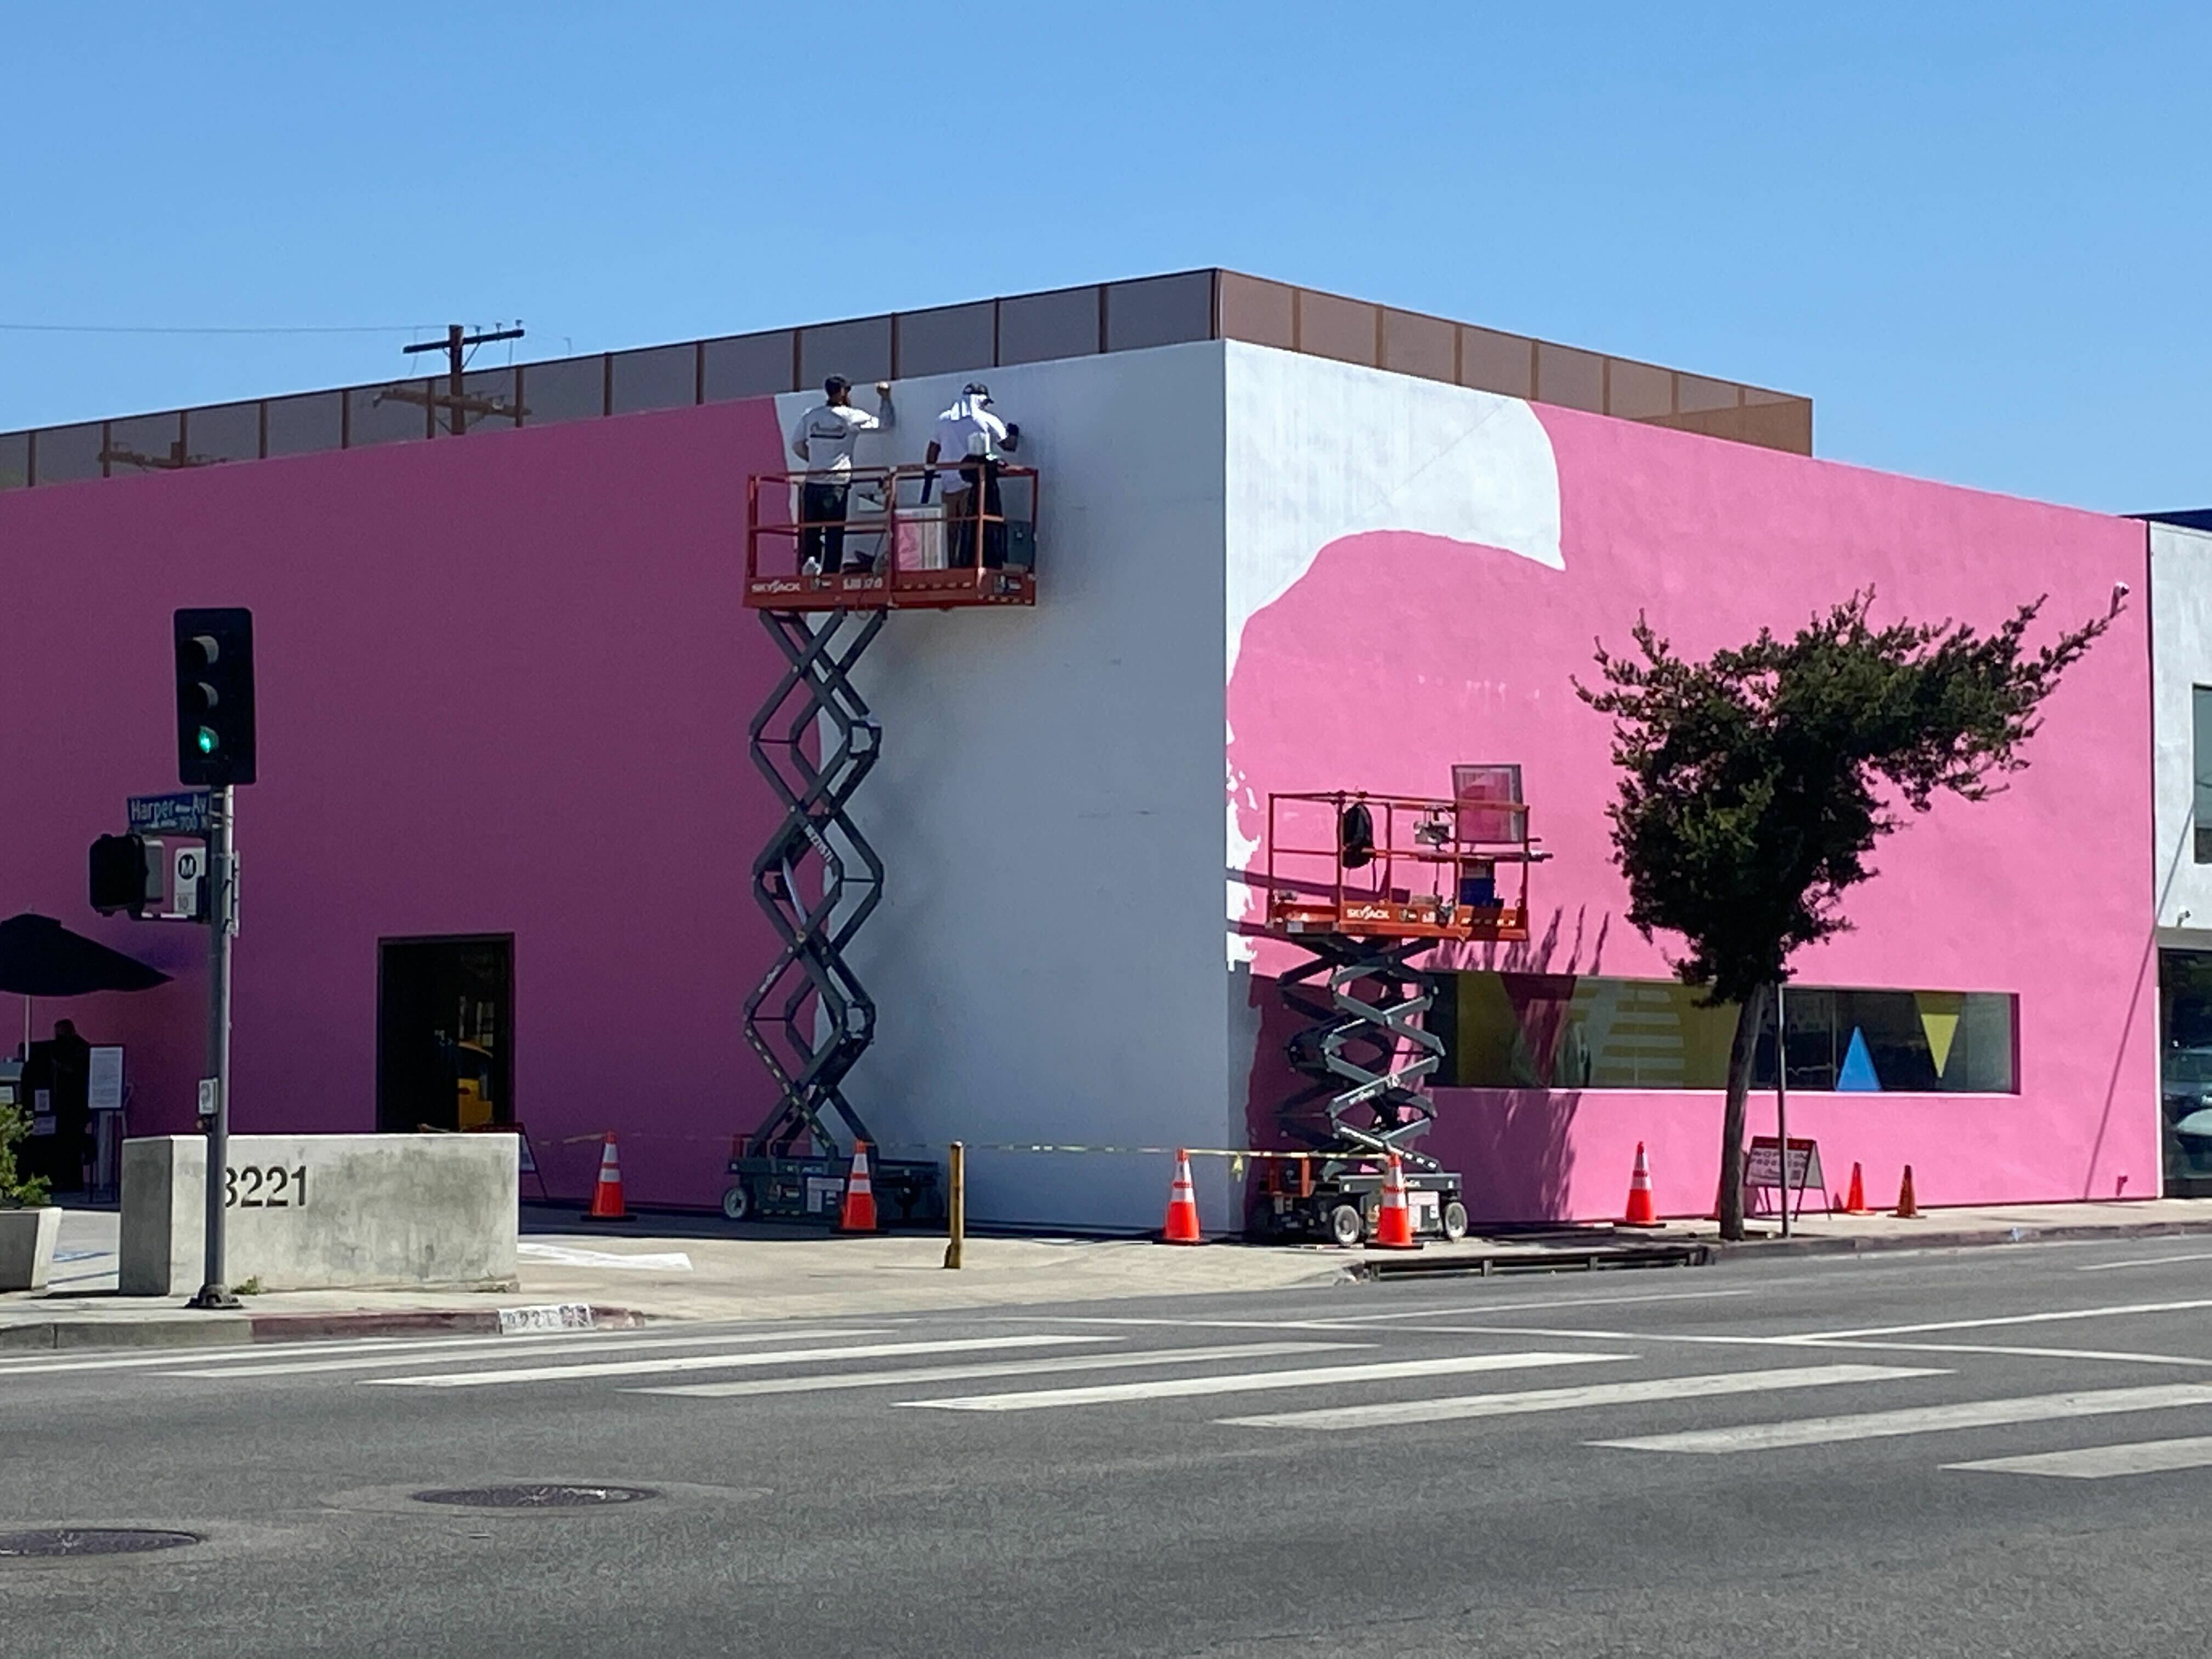 A pink building with painters painting the corner white.